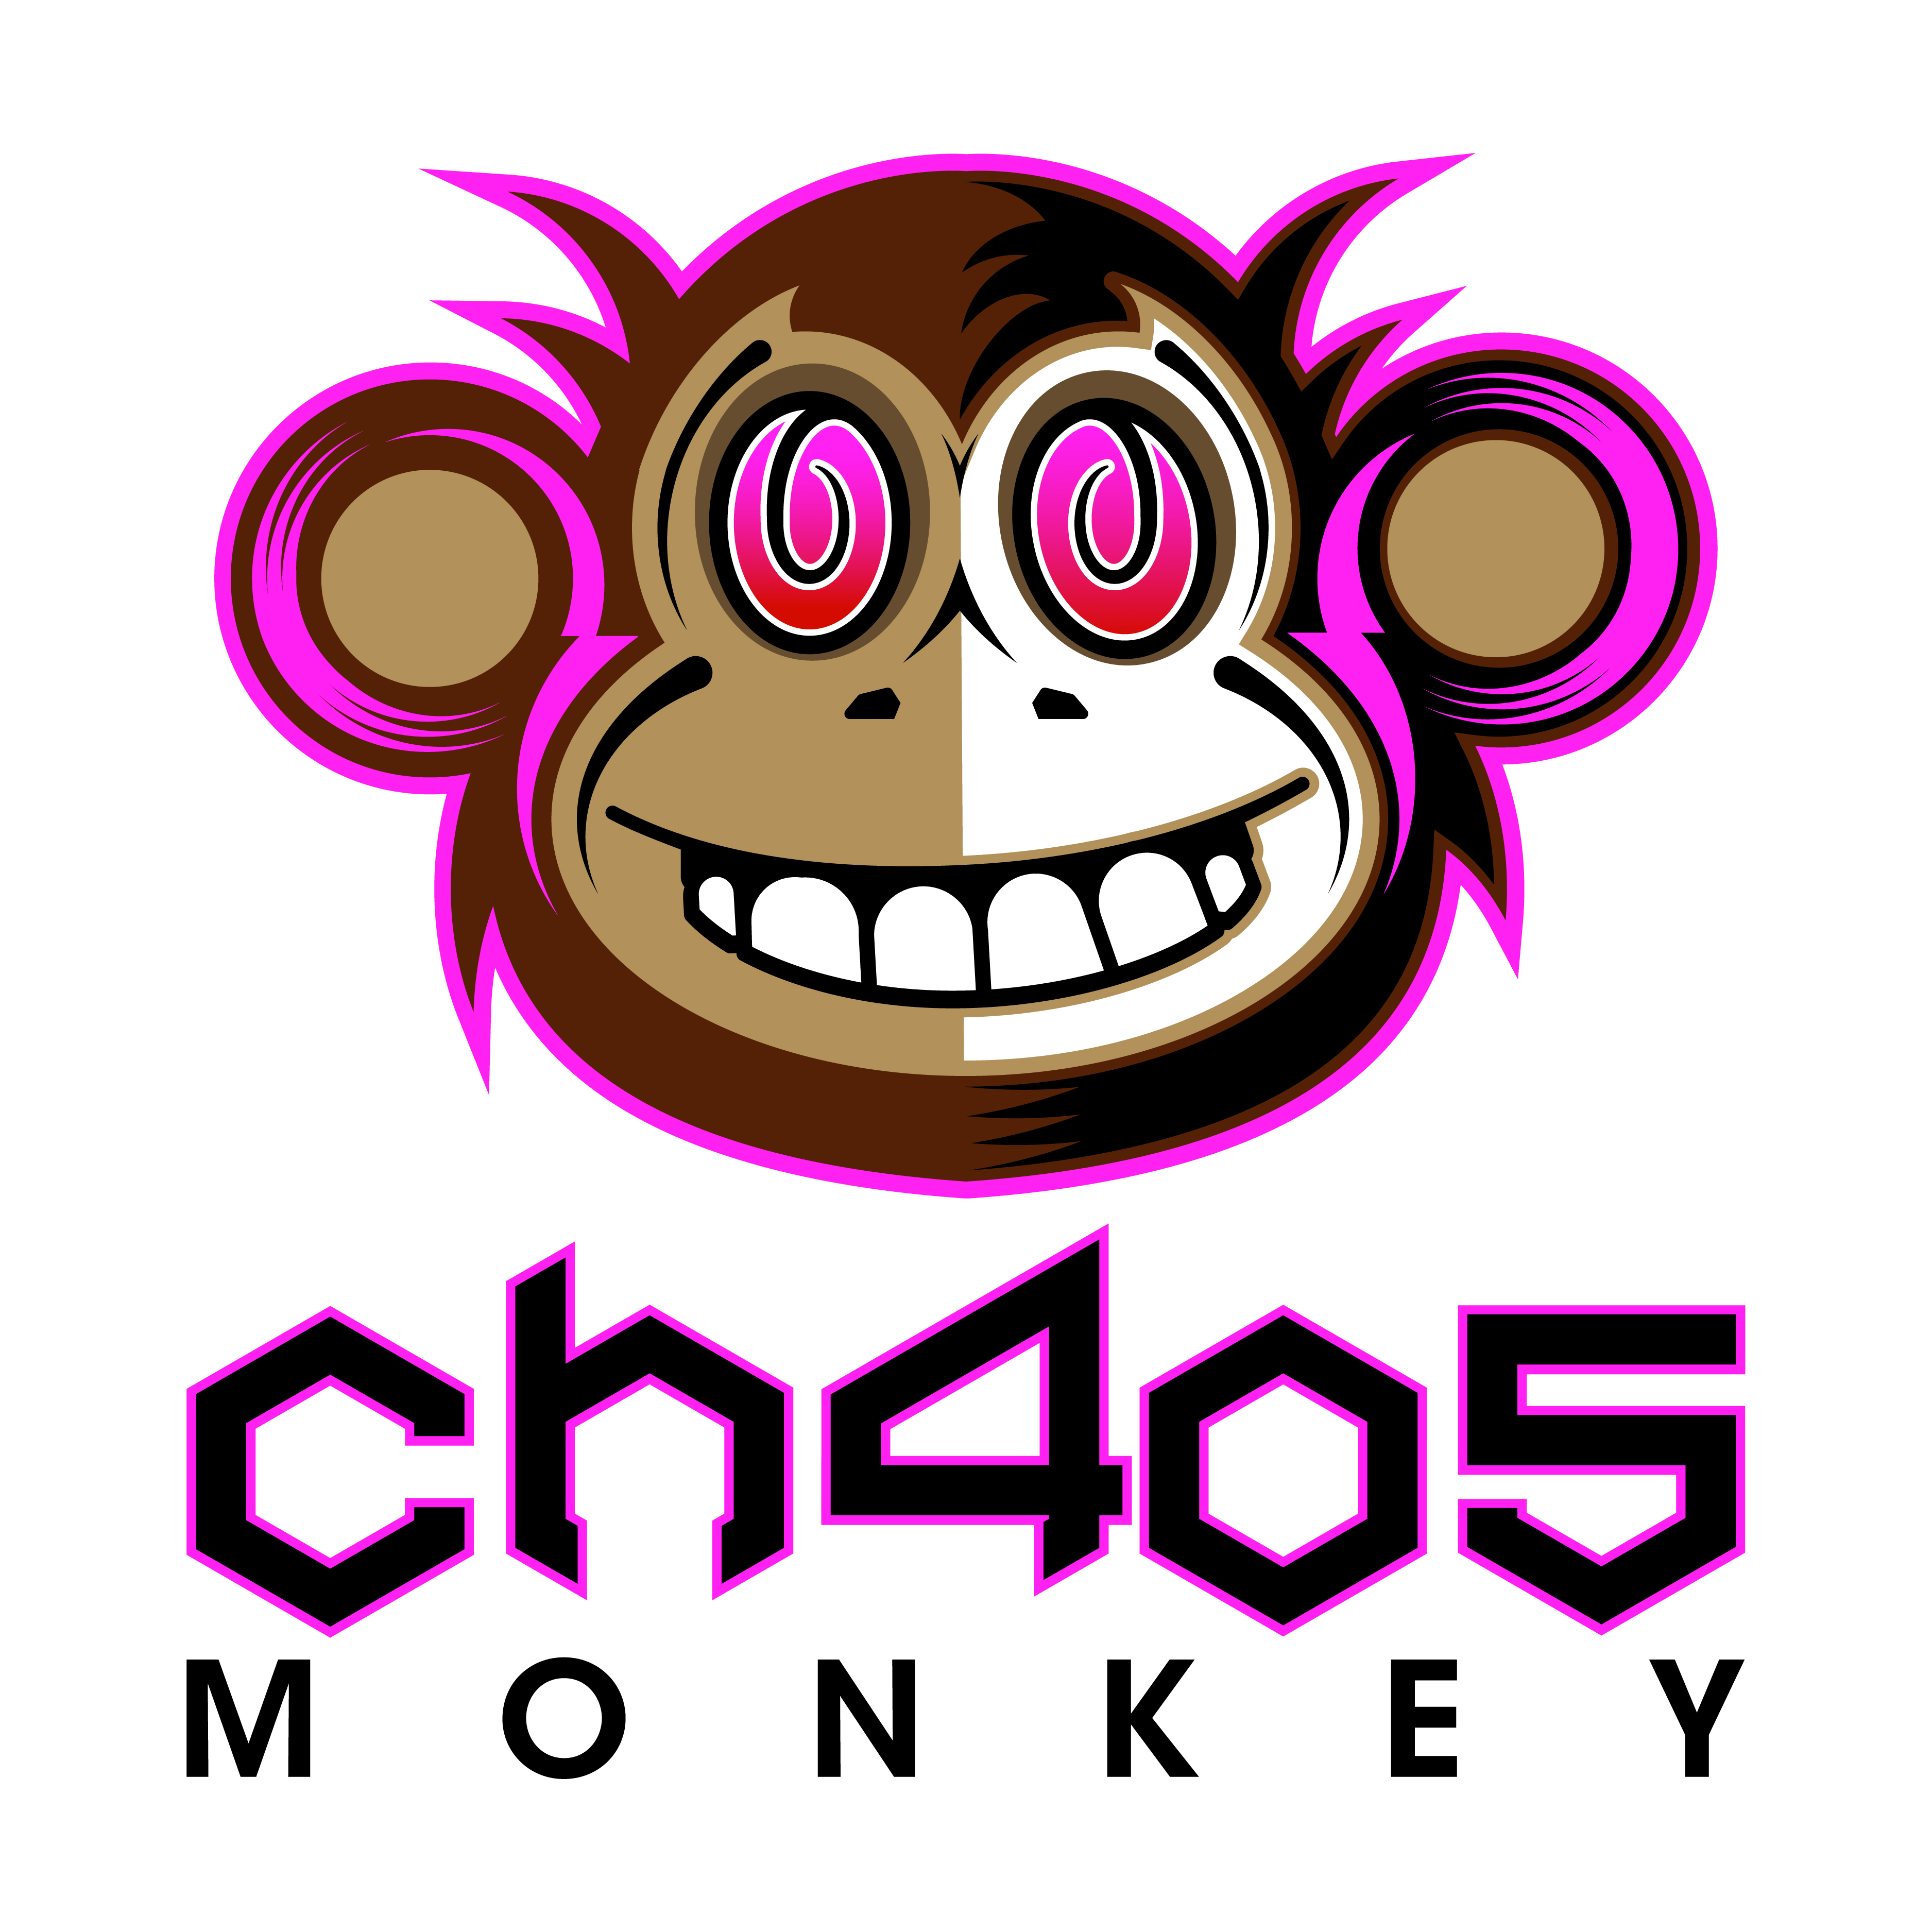 Chaos Monkey logo design by logo designer Pyrographx for your inspiration and for the worlds largest logo competition